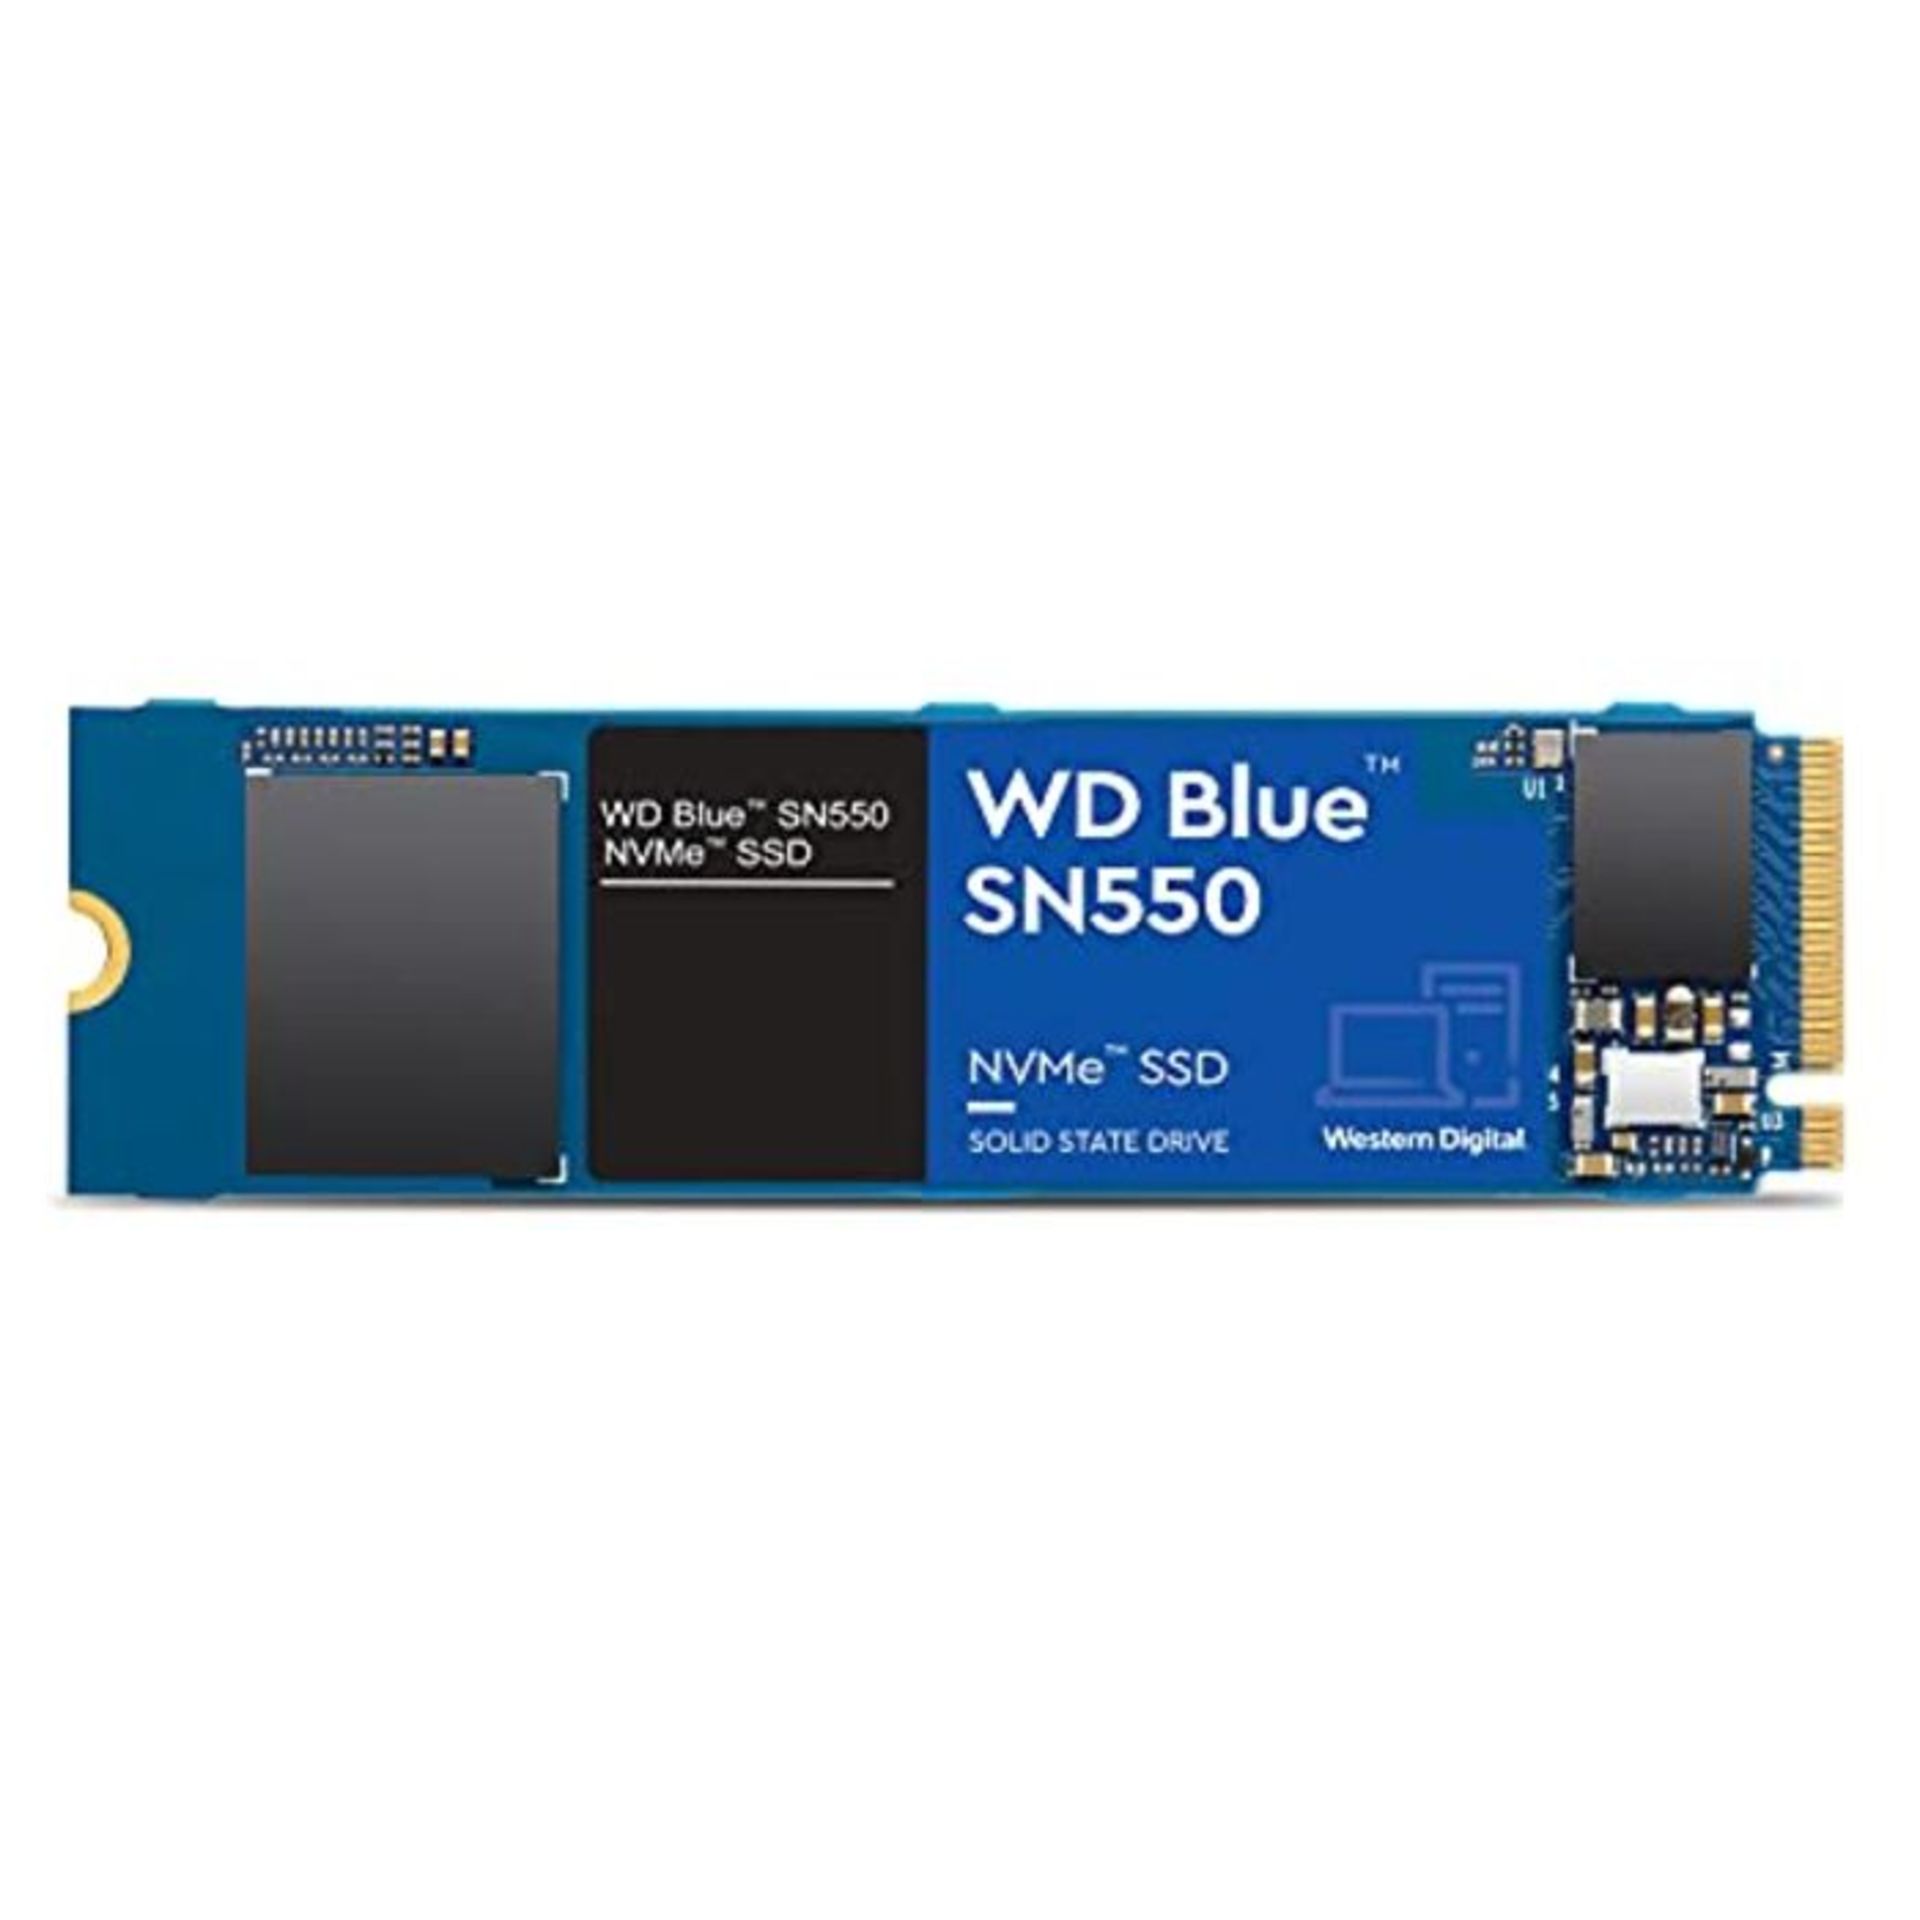 RRP £150.00 WD Blue SN550 1TB High-Performance M.2 PCIe NVME SSD, with up to 2,400MB/s read speed